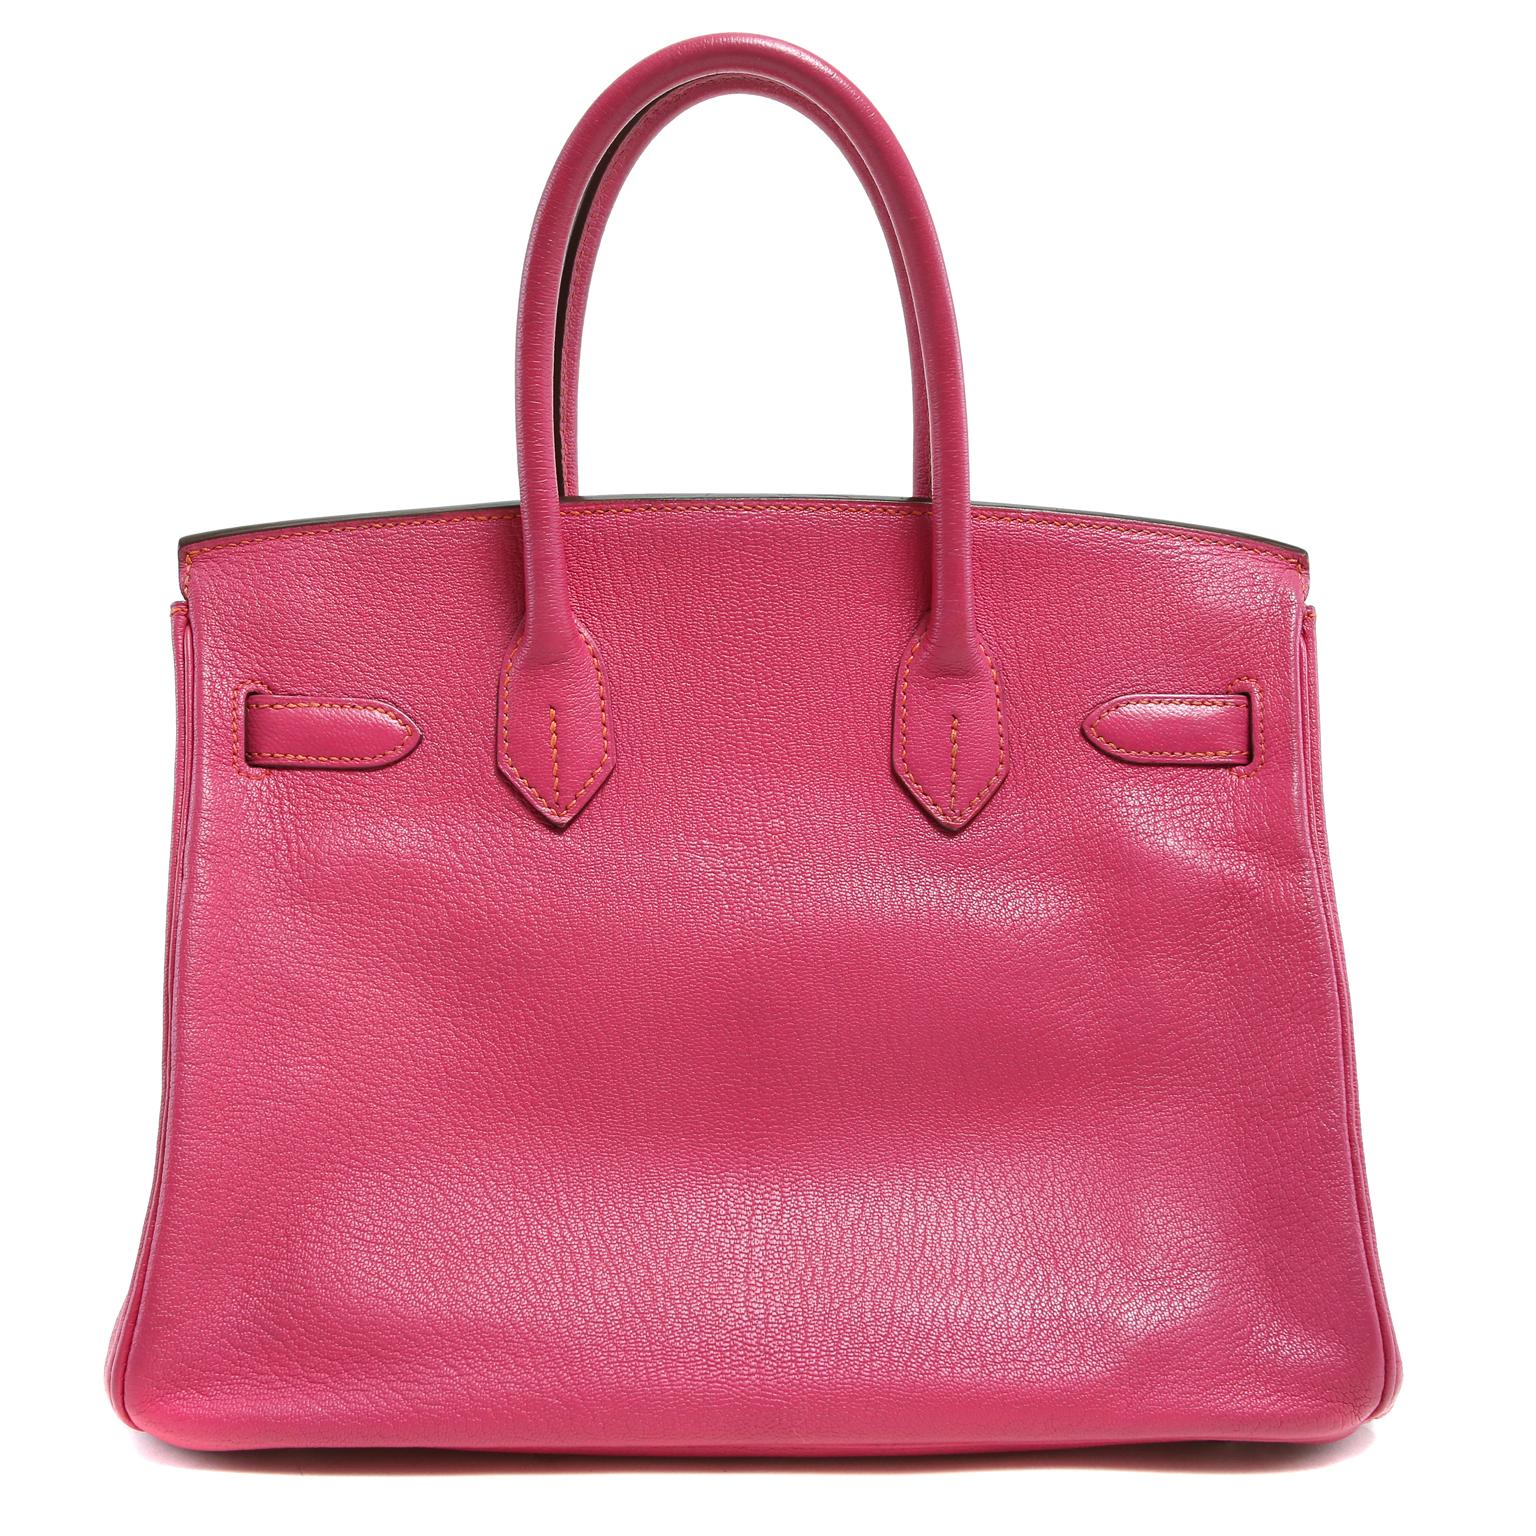 This authentic Hermès Rose Shocking Chevre Leather 30 cm Birkin Bag is new with the plastic intact on the hardware.    A limited edition piece, the horseshoe symbol next to the Hermès stamp indicates a special order.  This service is only available